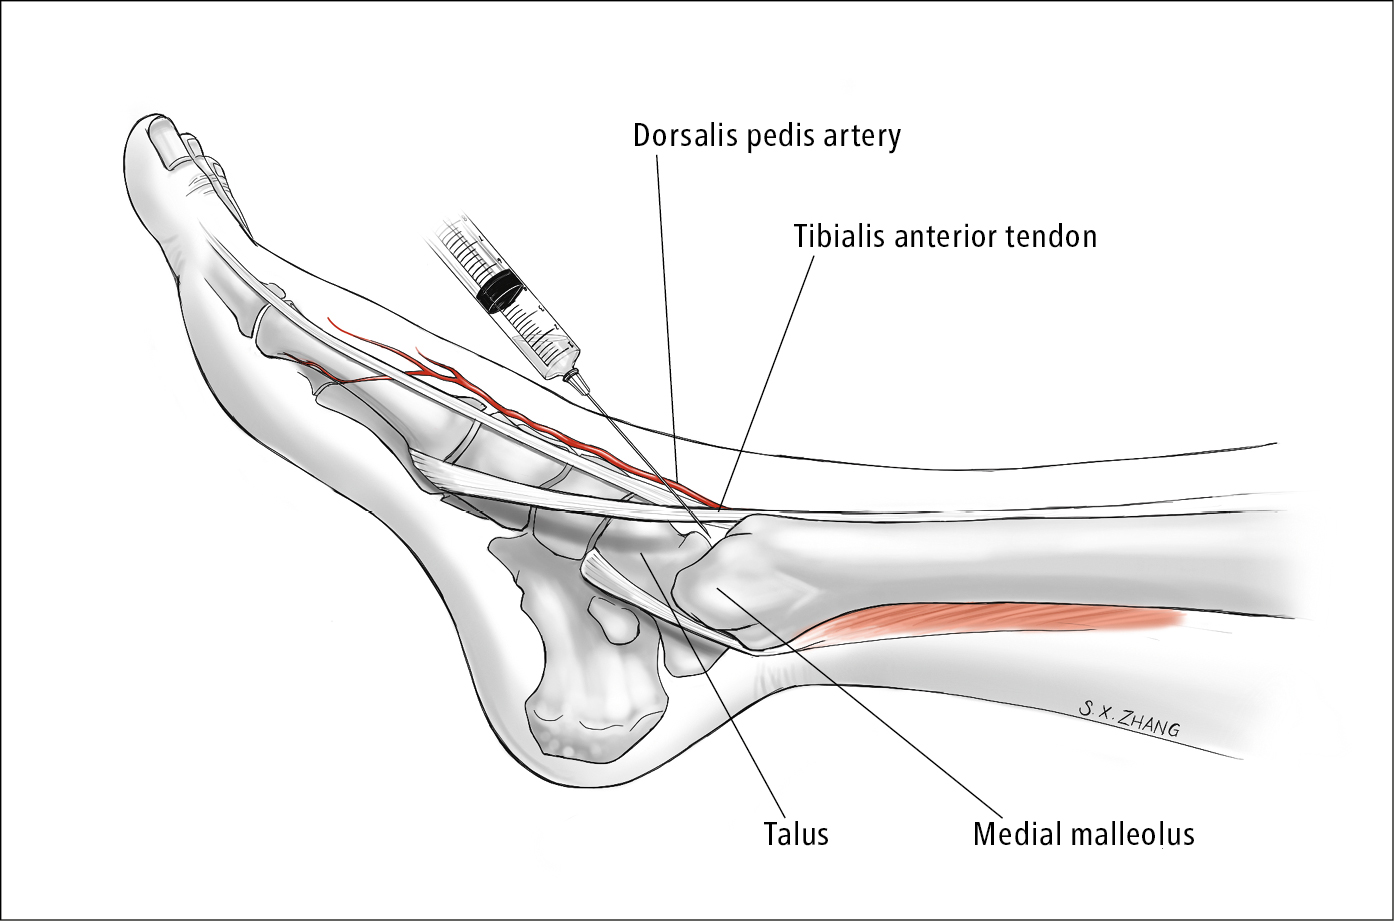 Figure 031_8266.  Ankle arthrocentesis.  Illustration courtesy of Dr Shannon Zhang.  